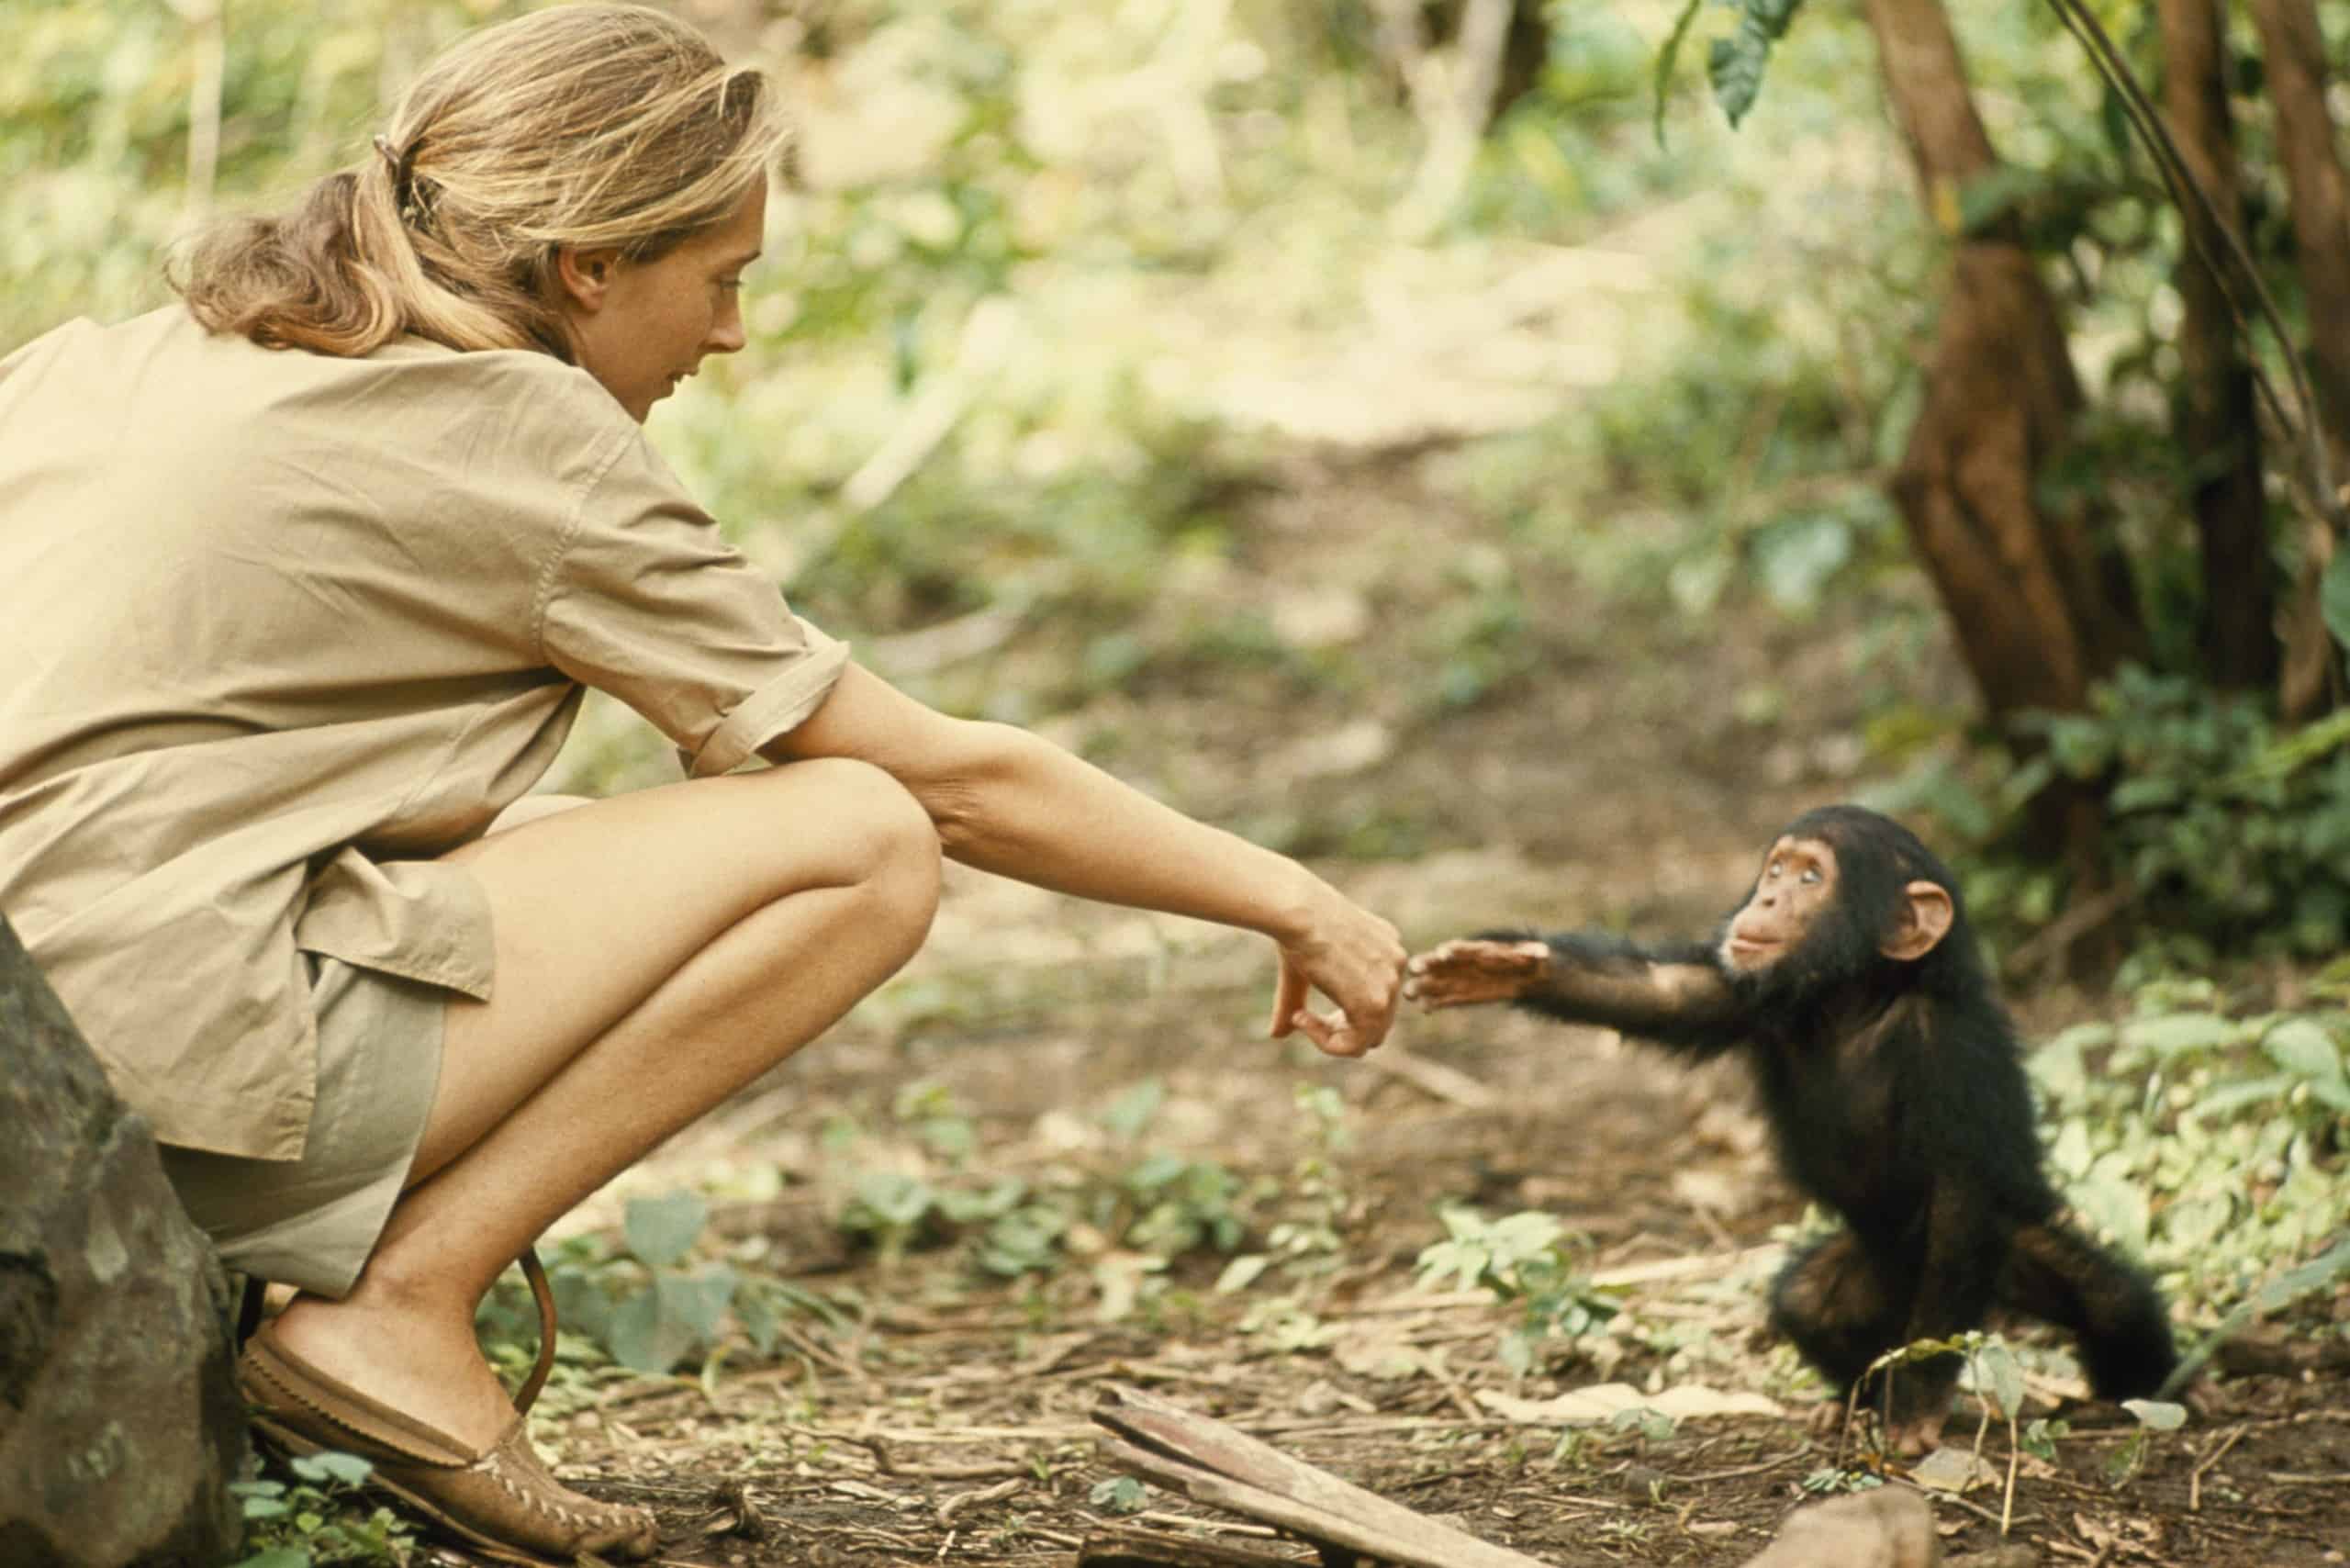 Jane Goodall Exhibit Showcases Her Contributions to Animals and the Earth